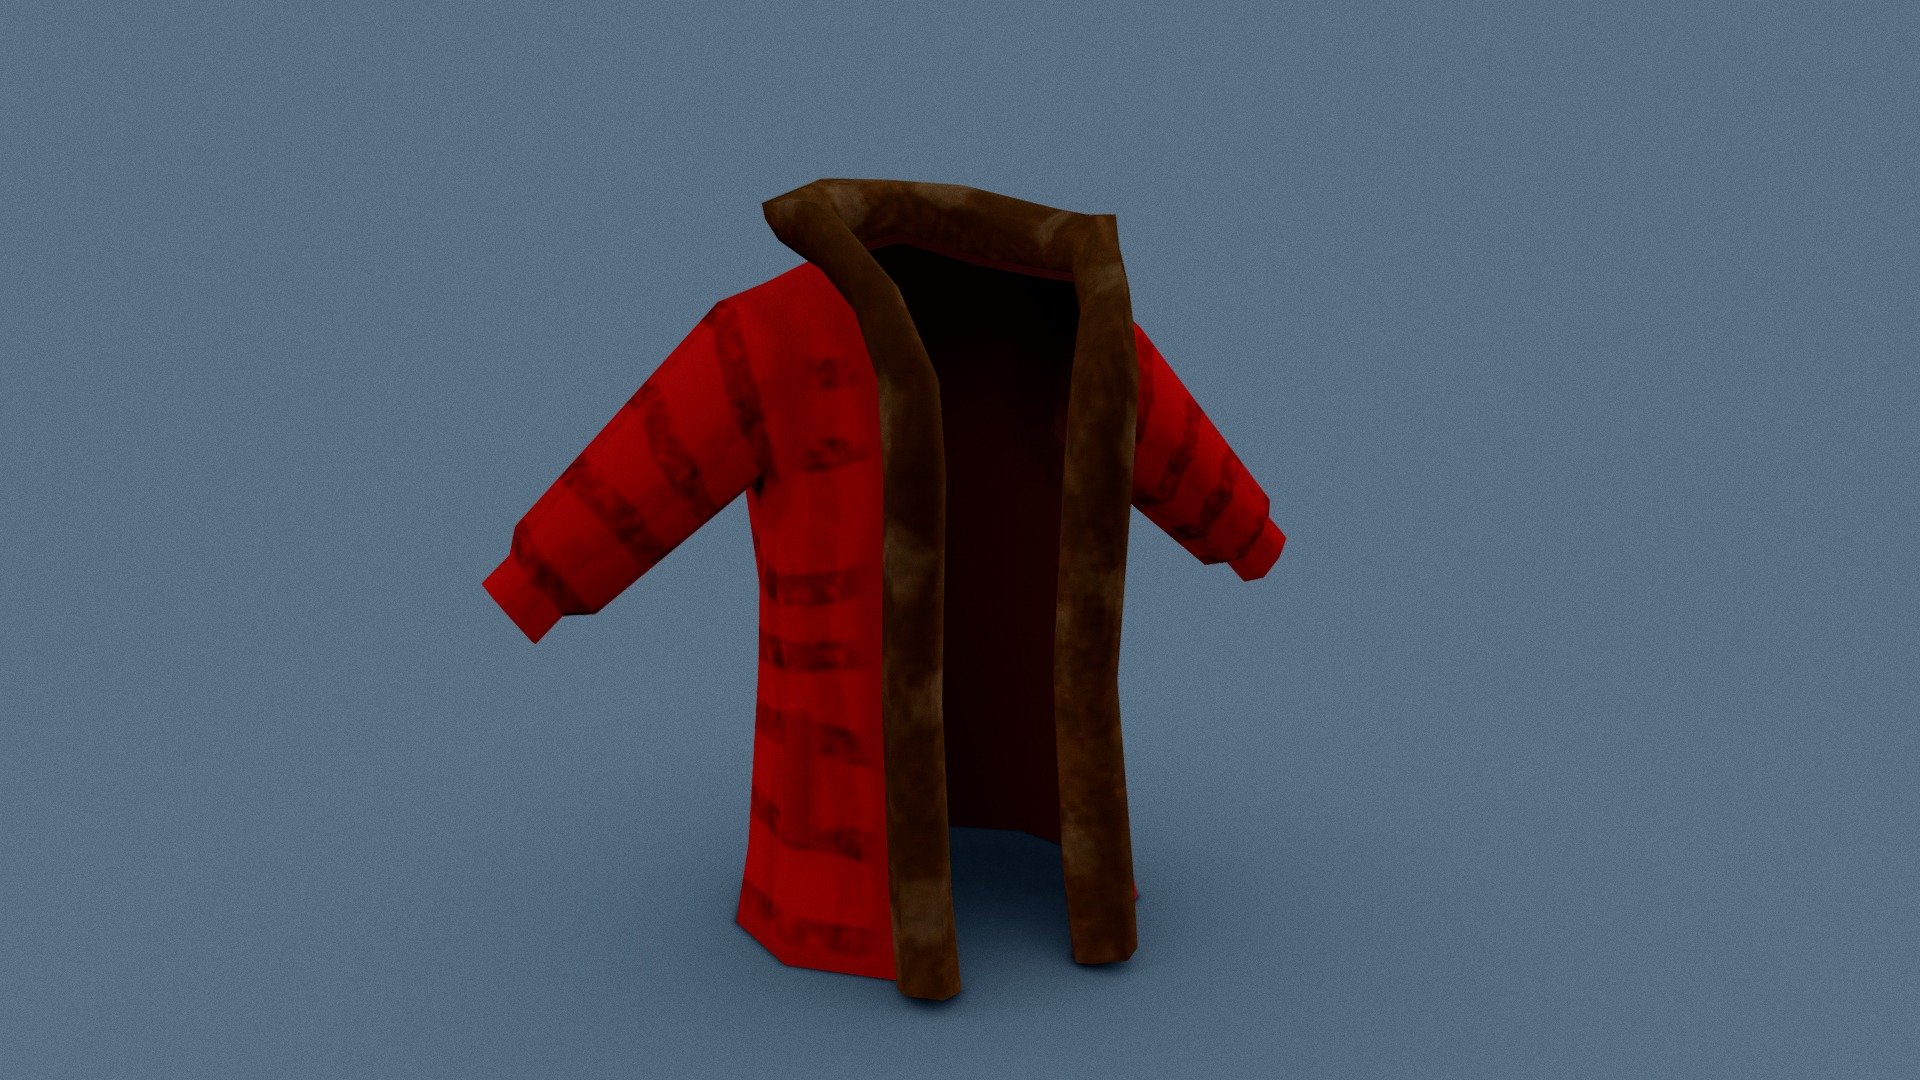 First Model for #3December, a warm and cosy winter coat. This little coat idea popped into my head as soon as I read the theme for day 1. Super excited to see what the oncoming themes are! - Winter Coat #3December - 3D model by Shannon Gallagher Silver (@shannon_gal_silver) 3d model